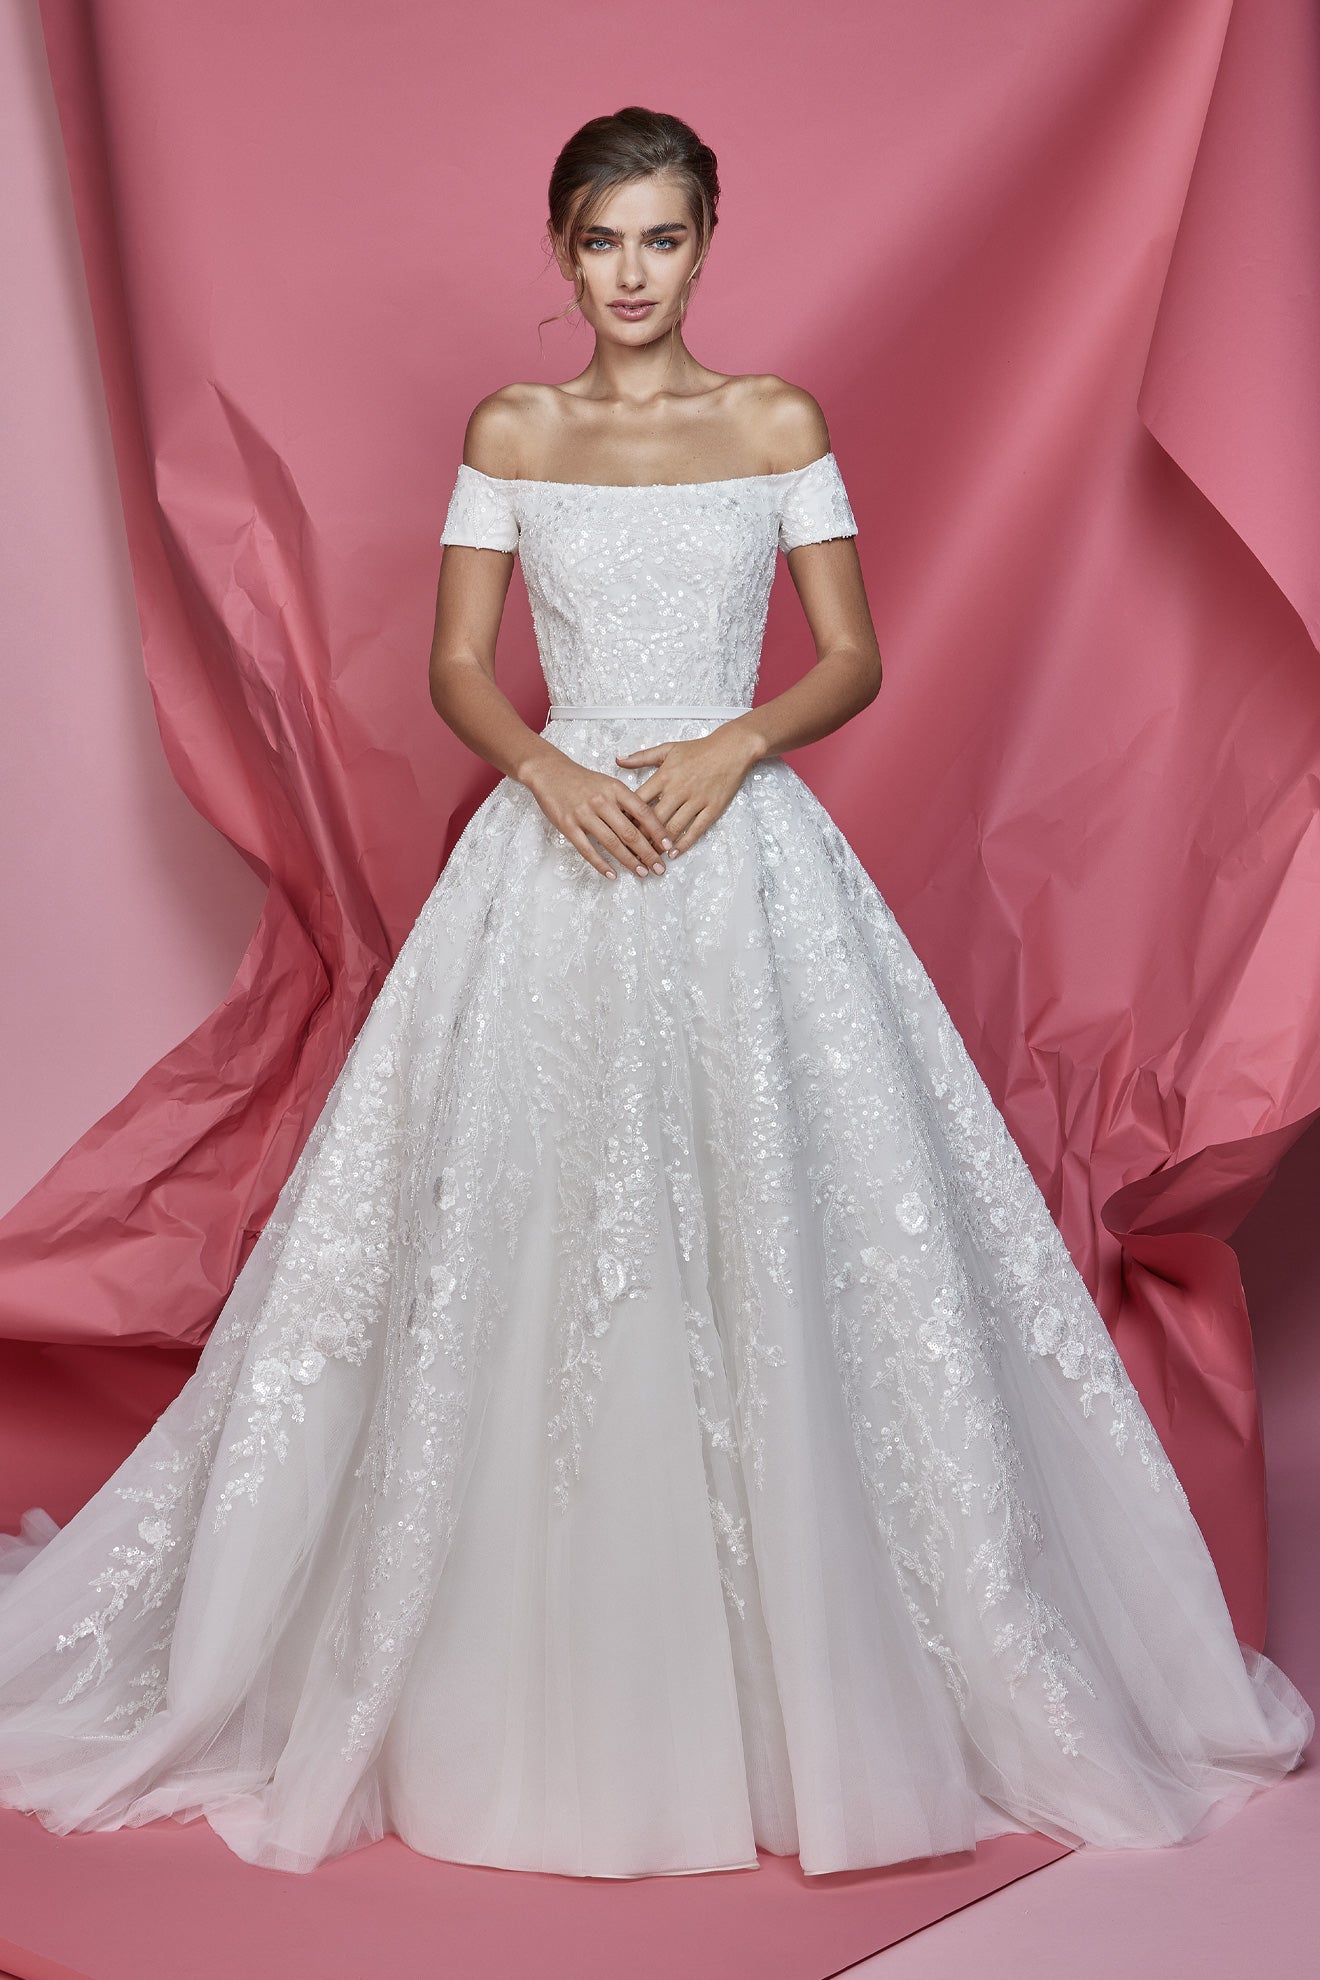 Classy off-shoulders layered tulle wedding dress